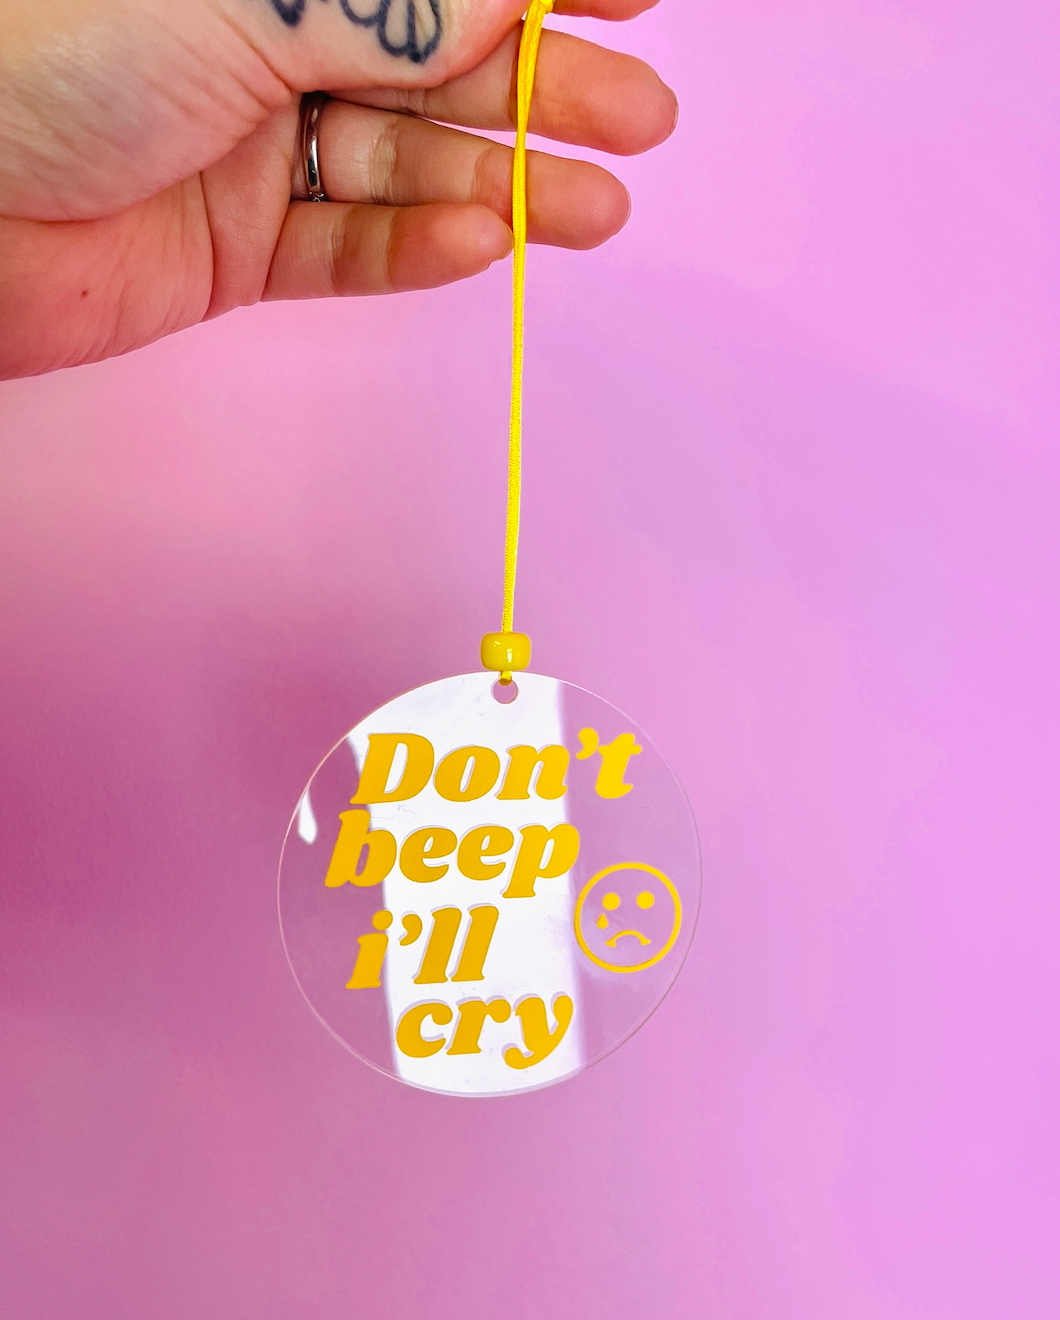 Don't beep i'll cry rearview mirror car accessory charm clear acrylic